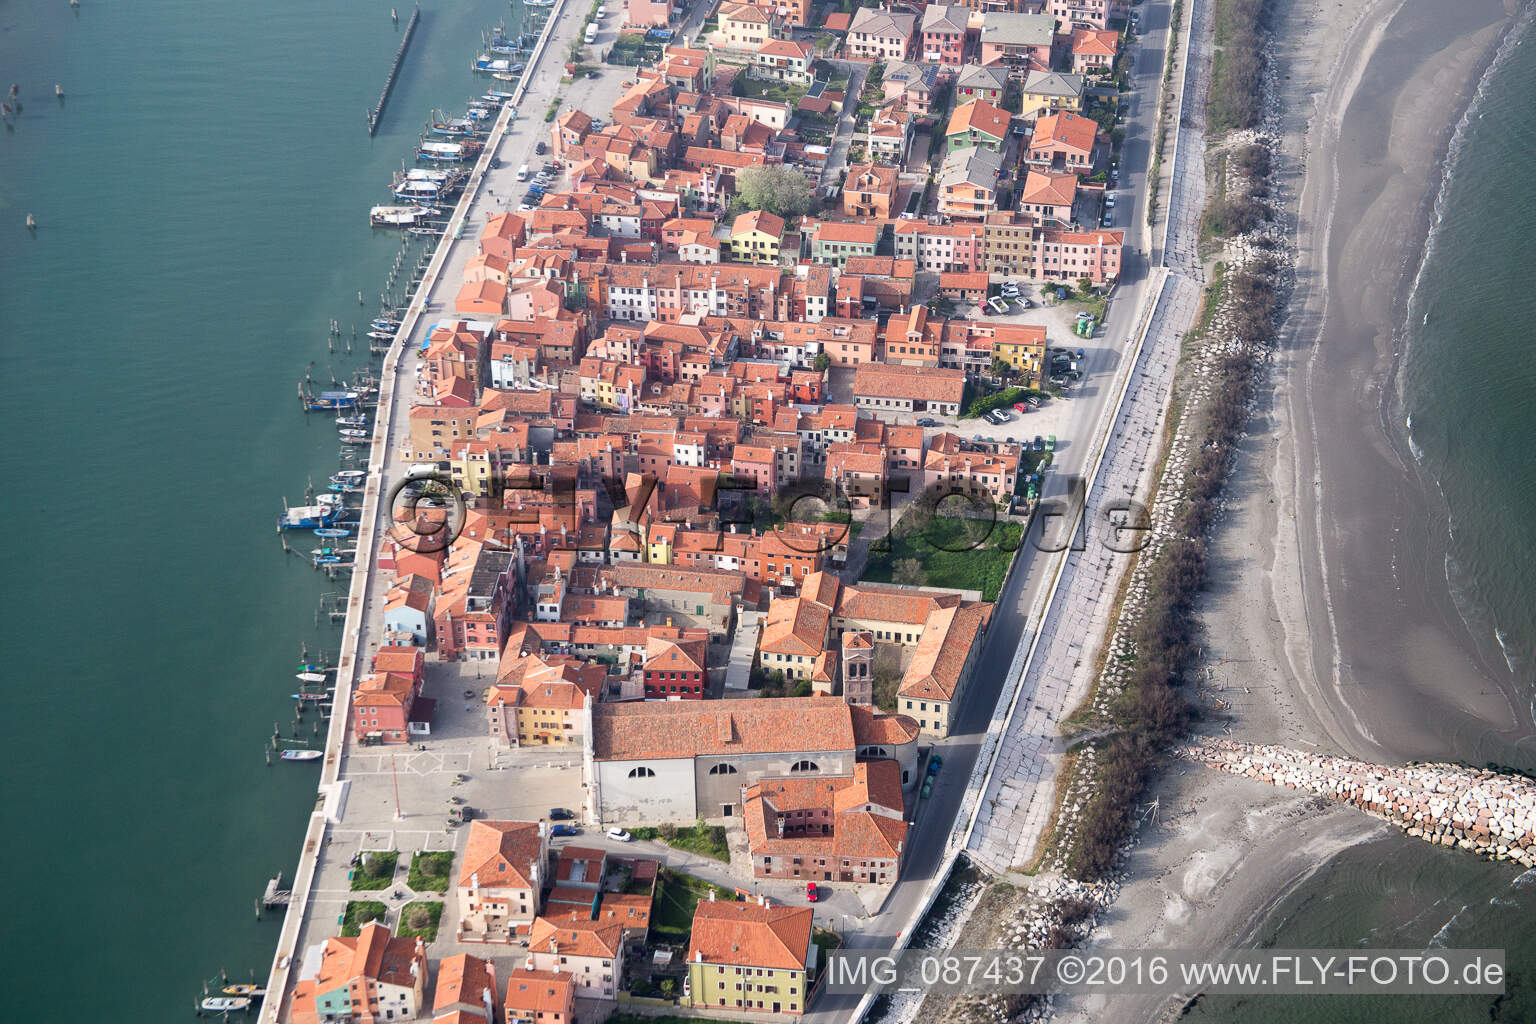 Settlement area in the district Pellestrina in Venedig in Venetien, Italy out of the air